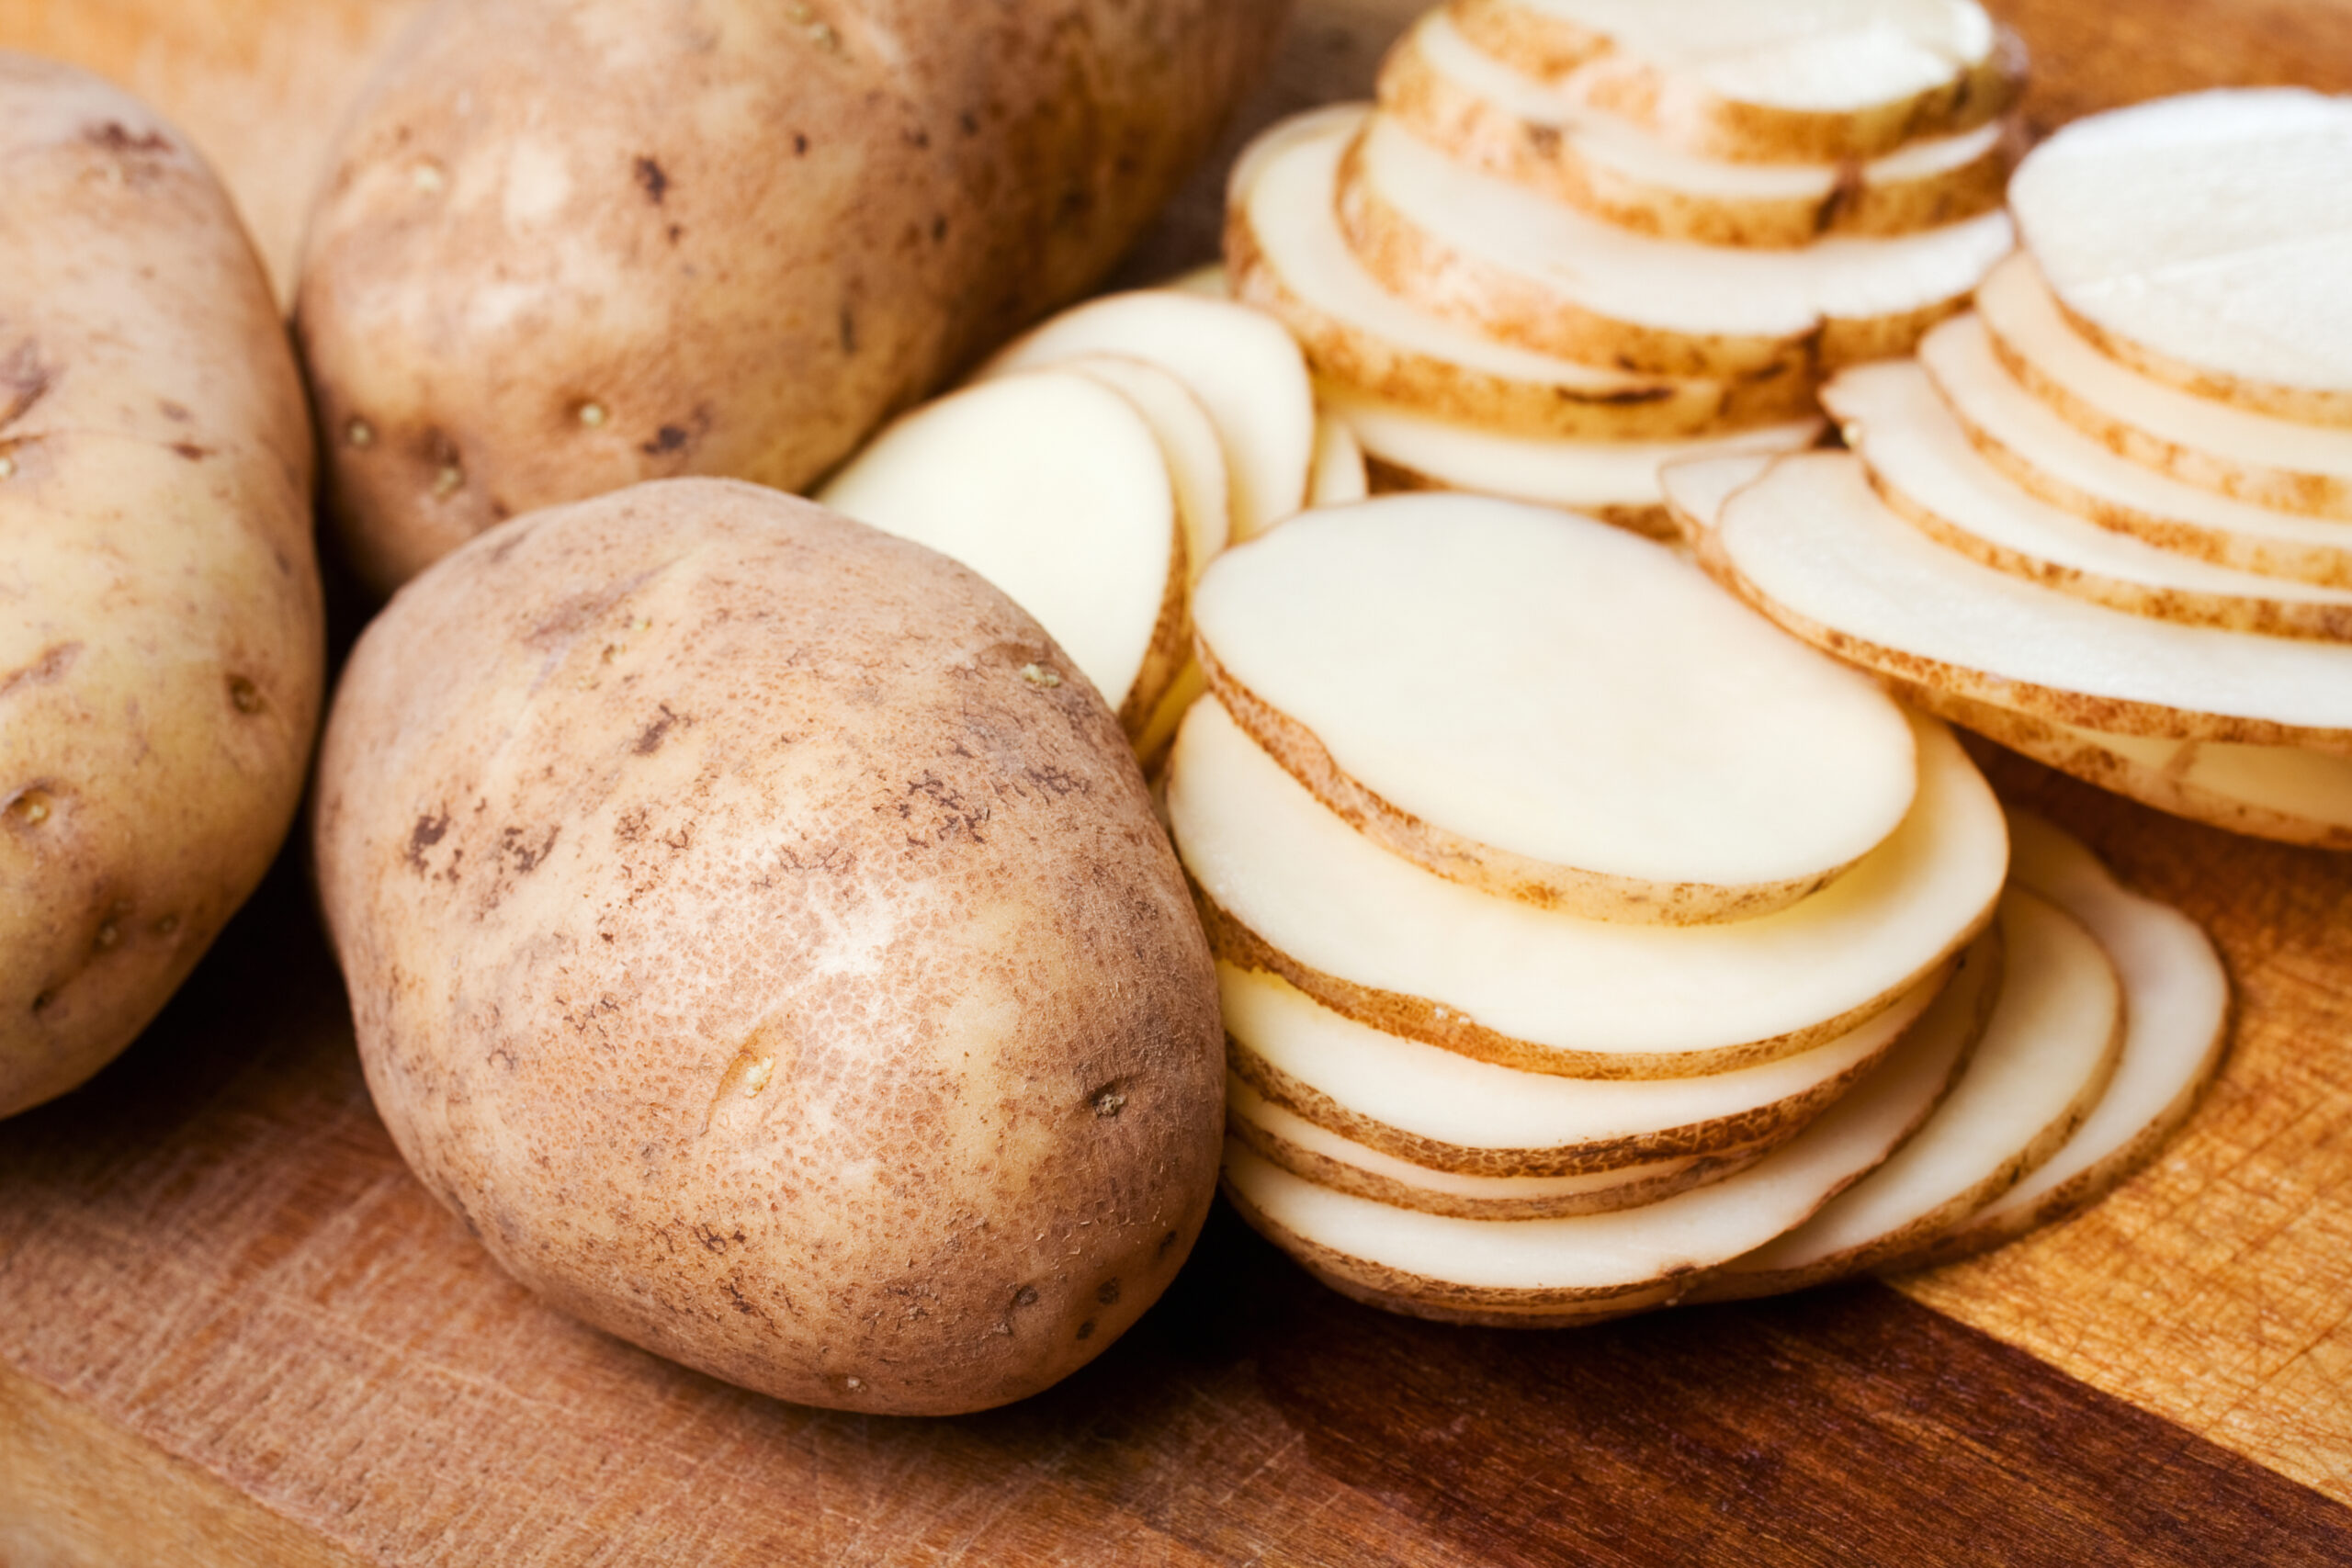 how many calories in a russet potato